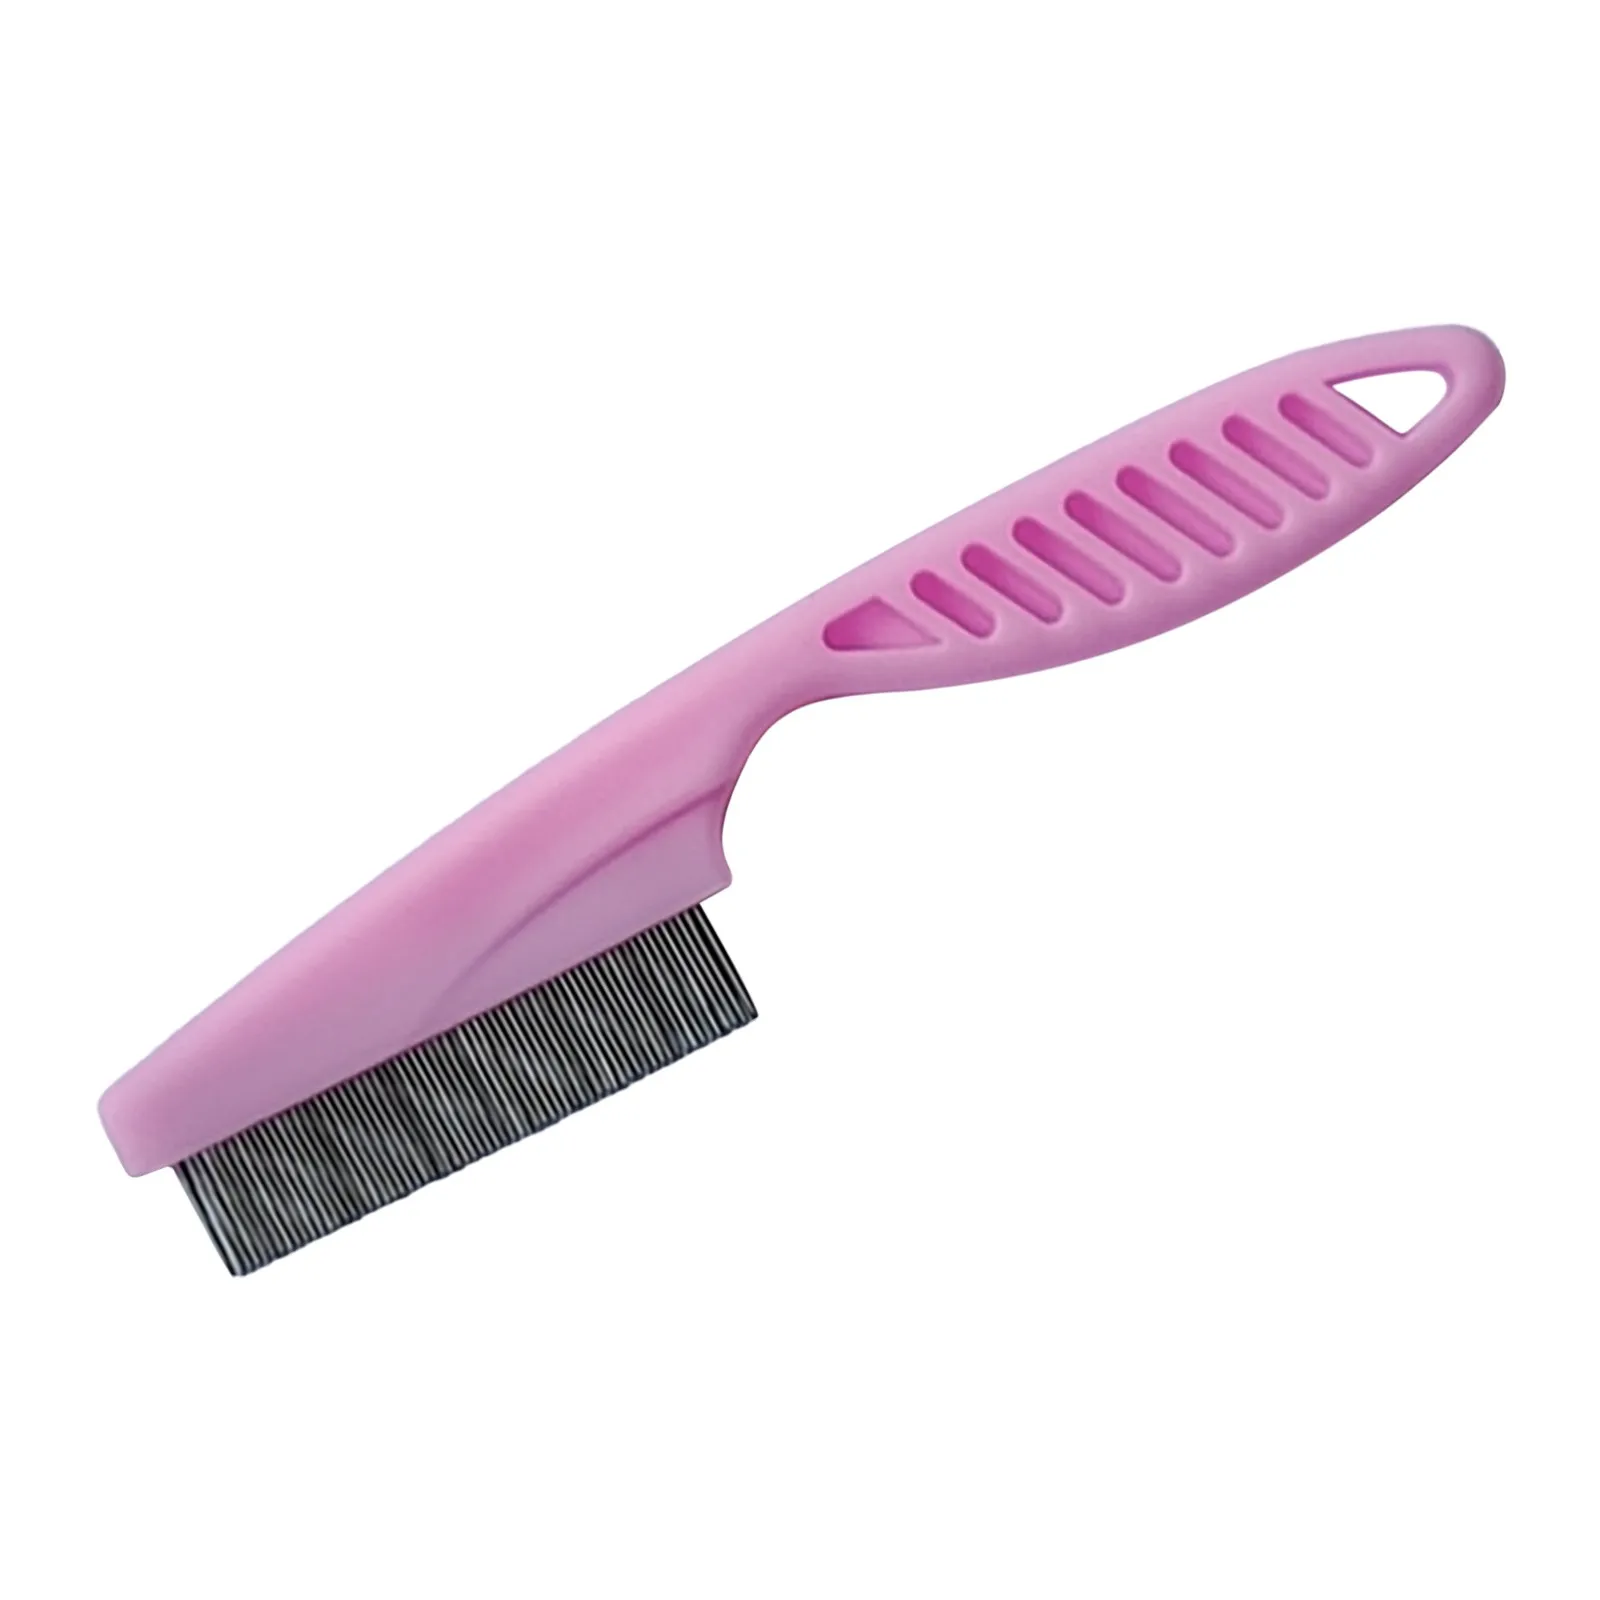 Pet Dog Grooming Comb Bright Multi-Colored Stripe Comb for Shaggy Cat Dogs Barber Grooming Tool Salon 